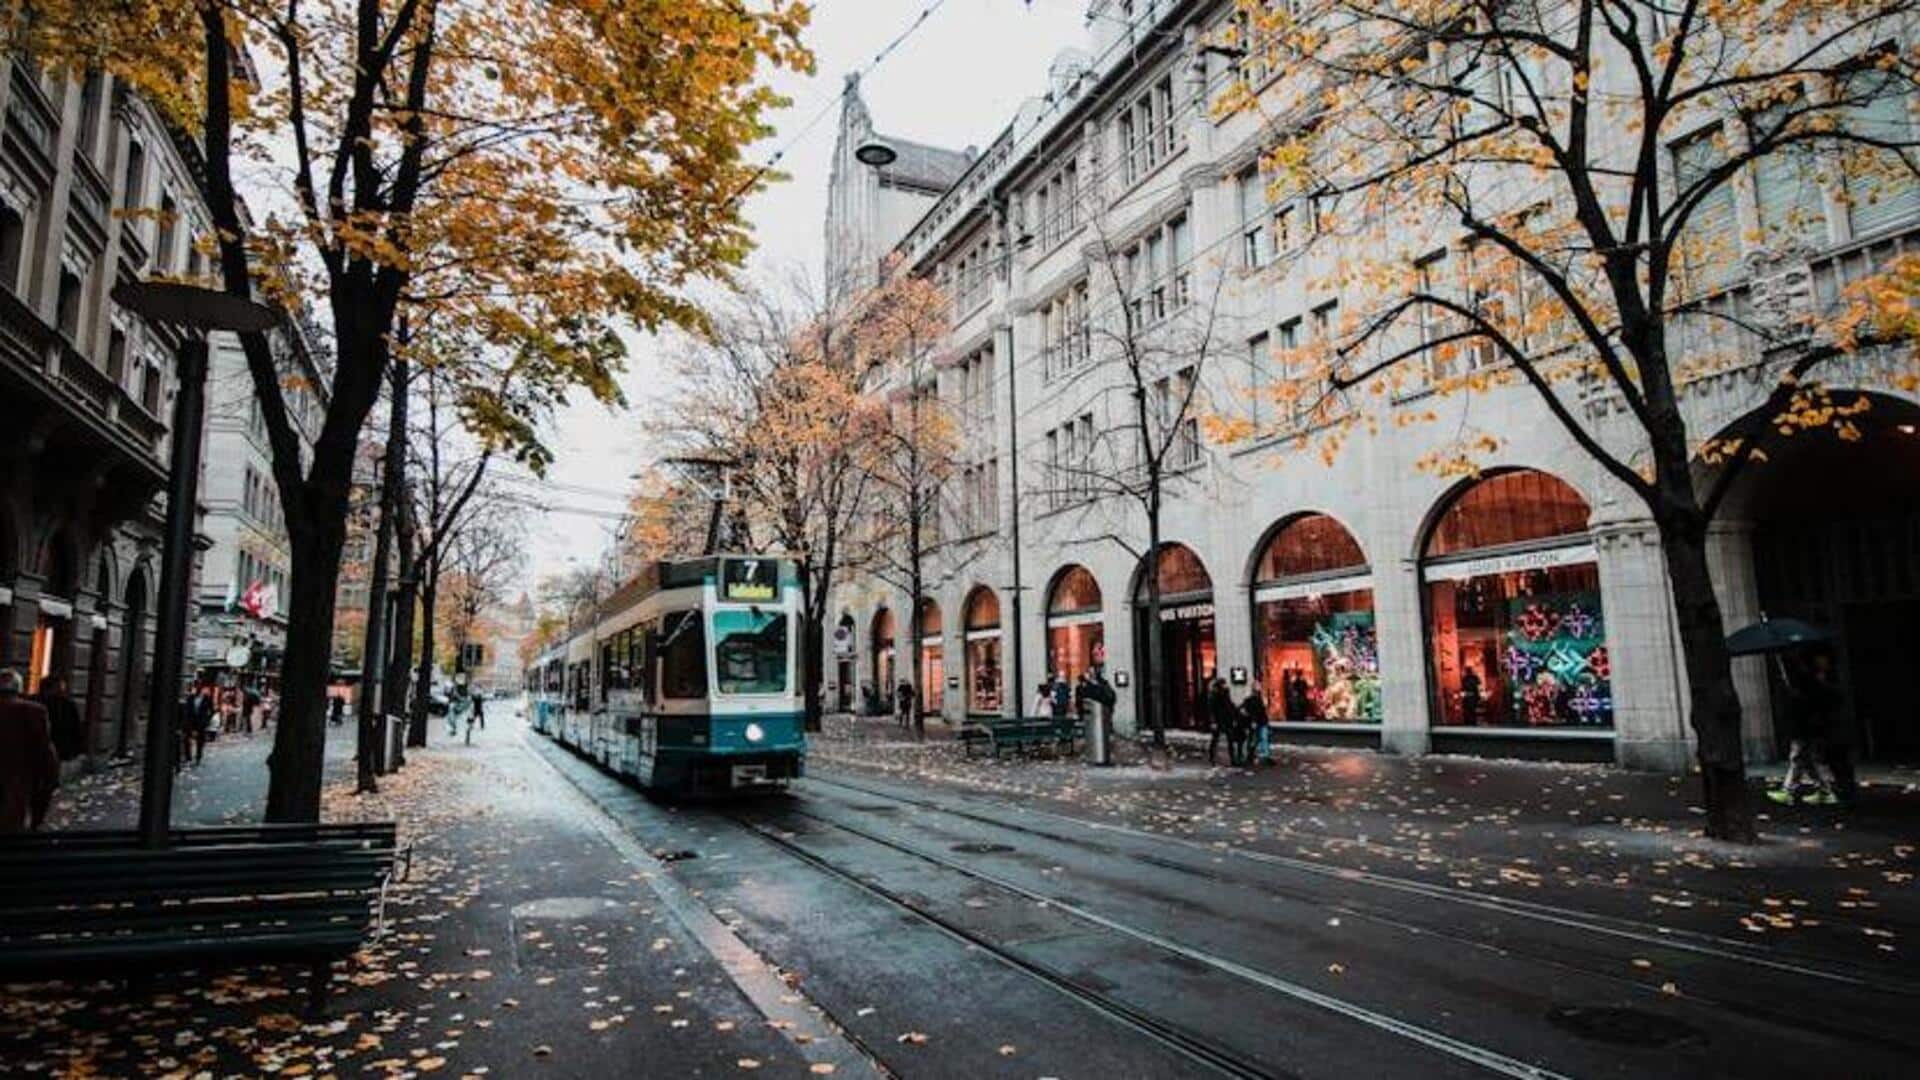 Melbourne's vintage tramway adventure: Top recommendations for a good experience